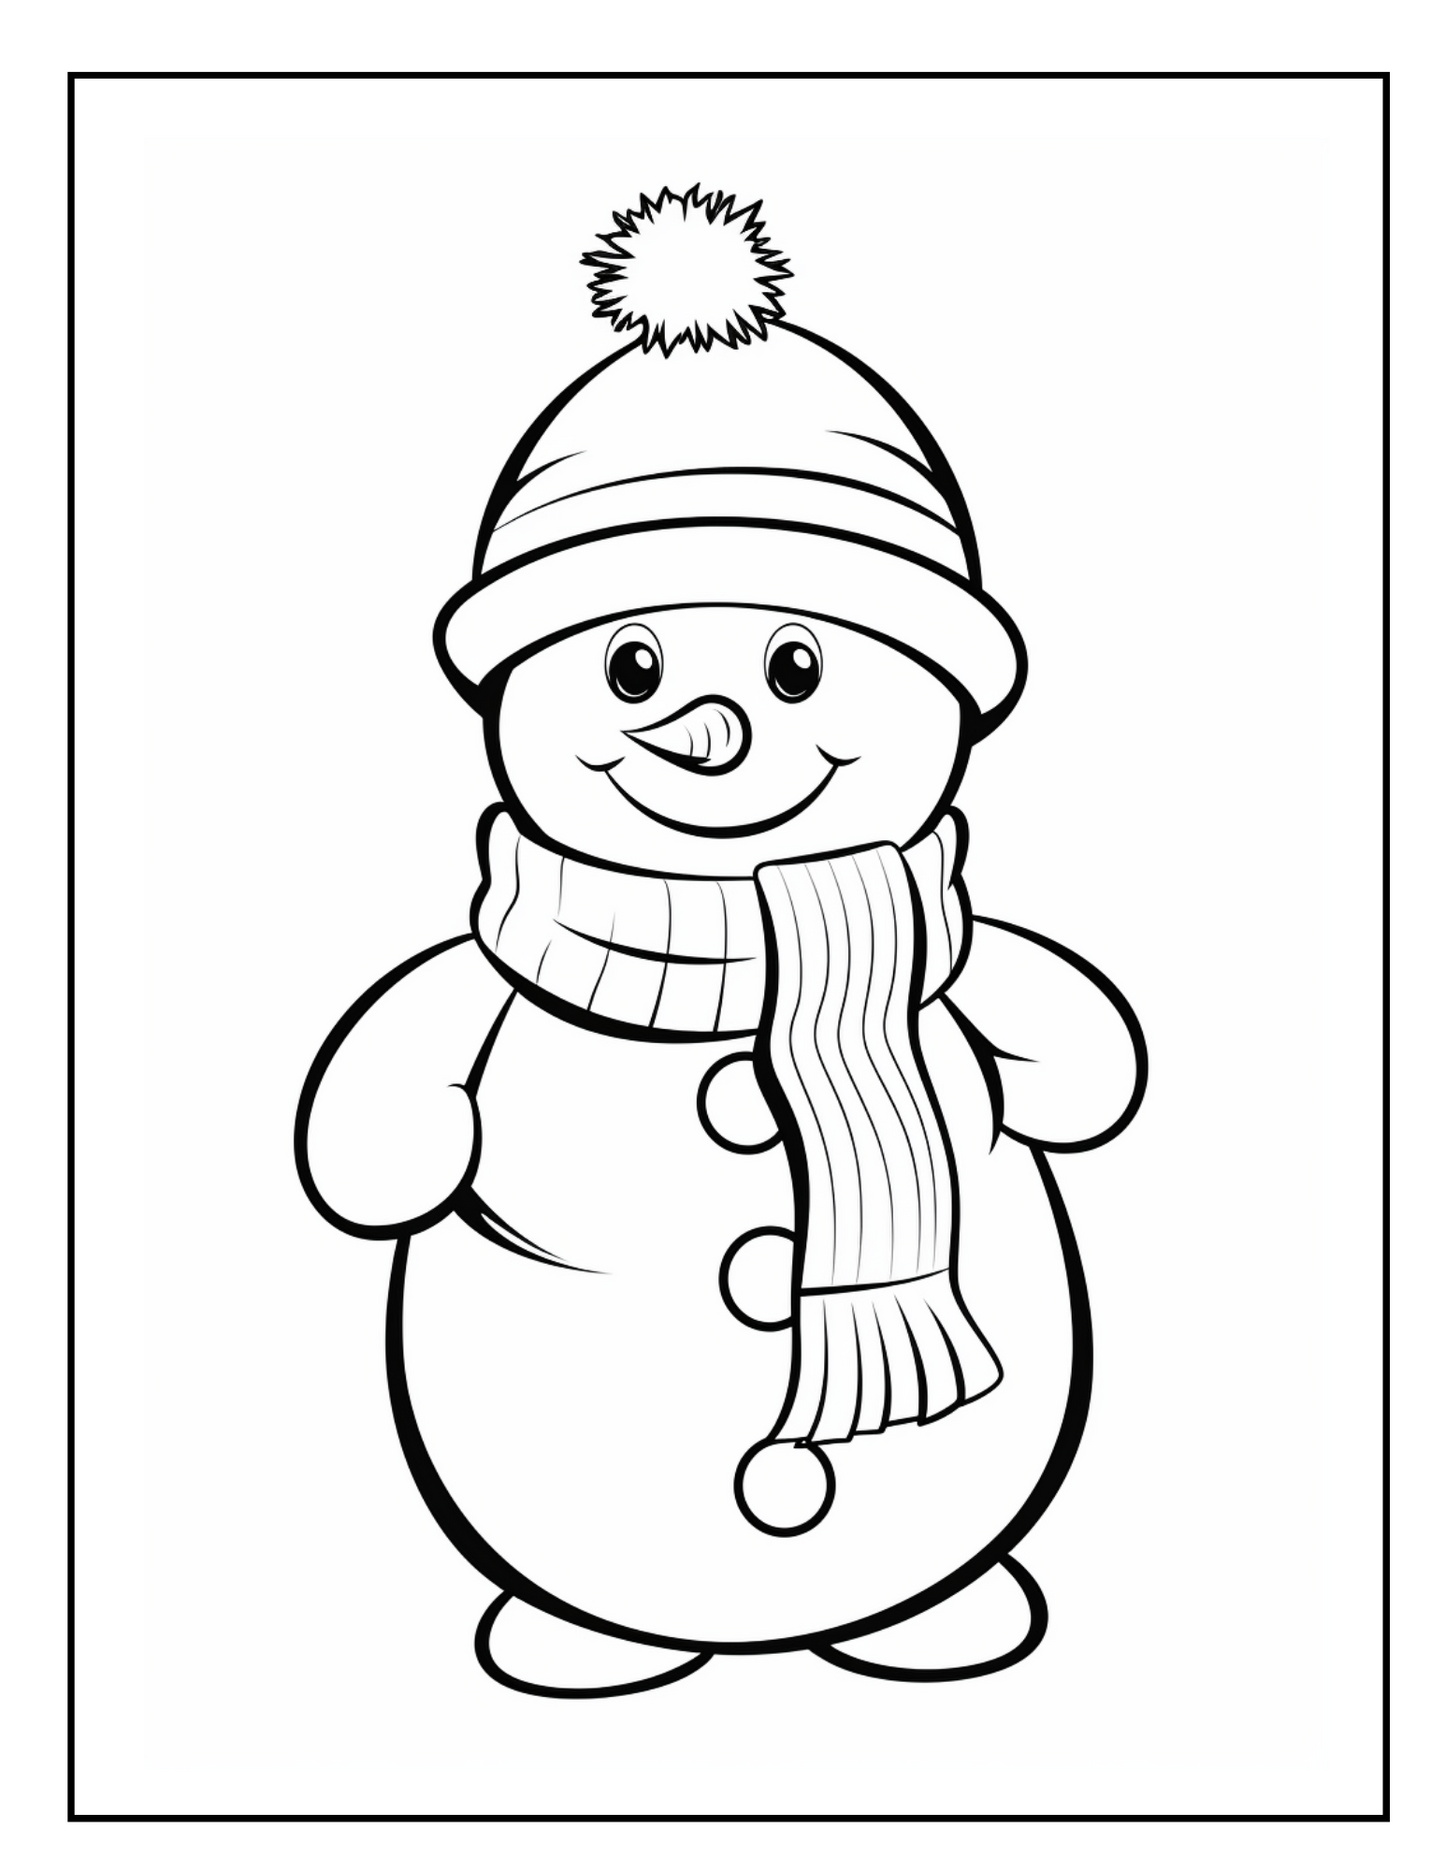 FREE Snowman Printable Coloring Page